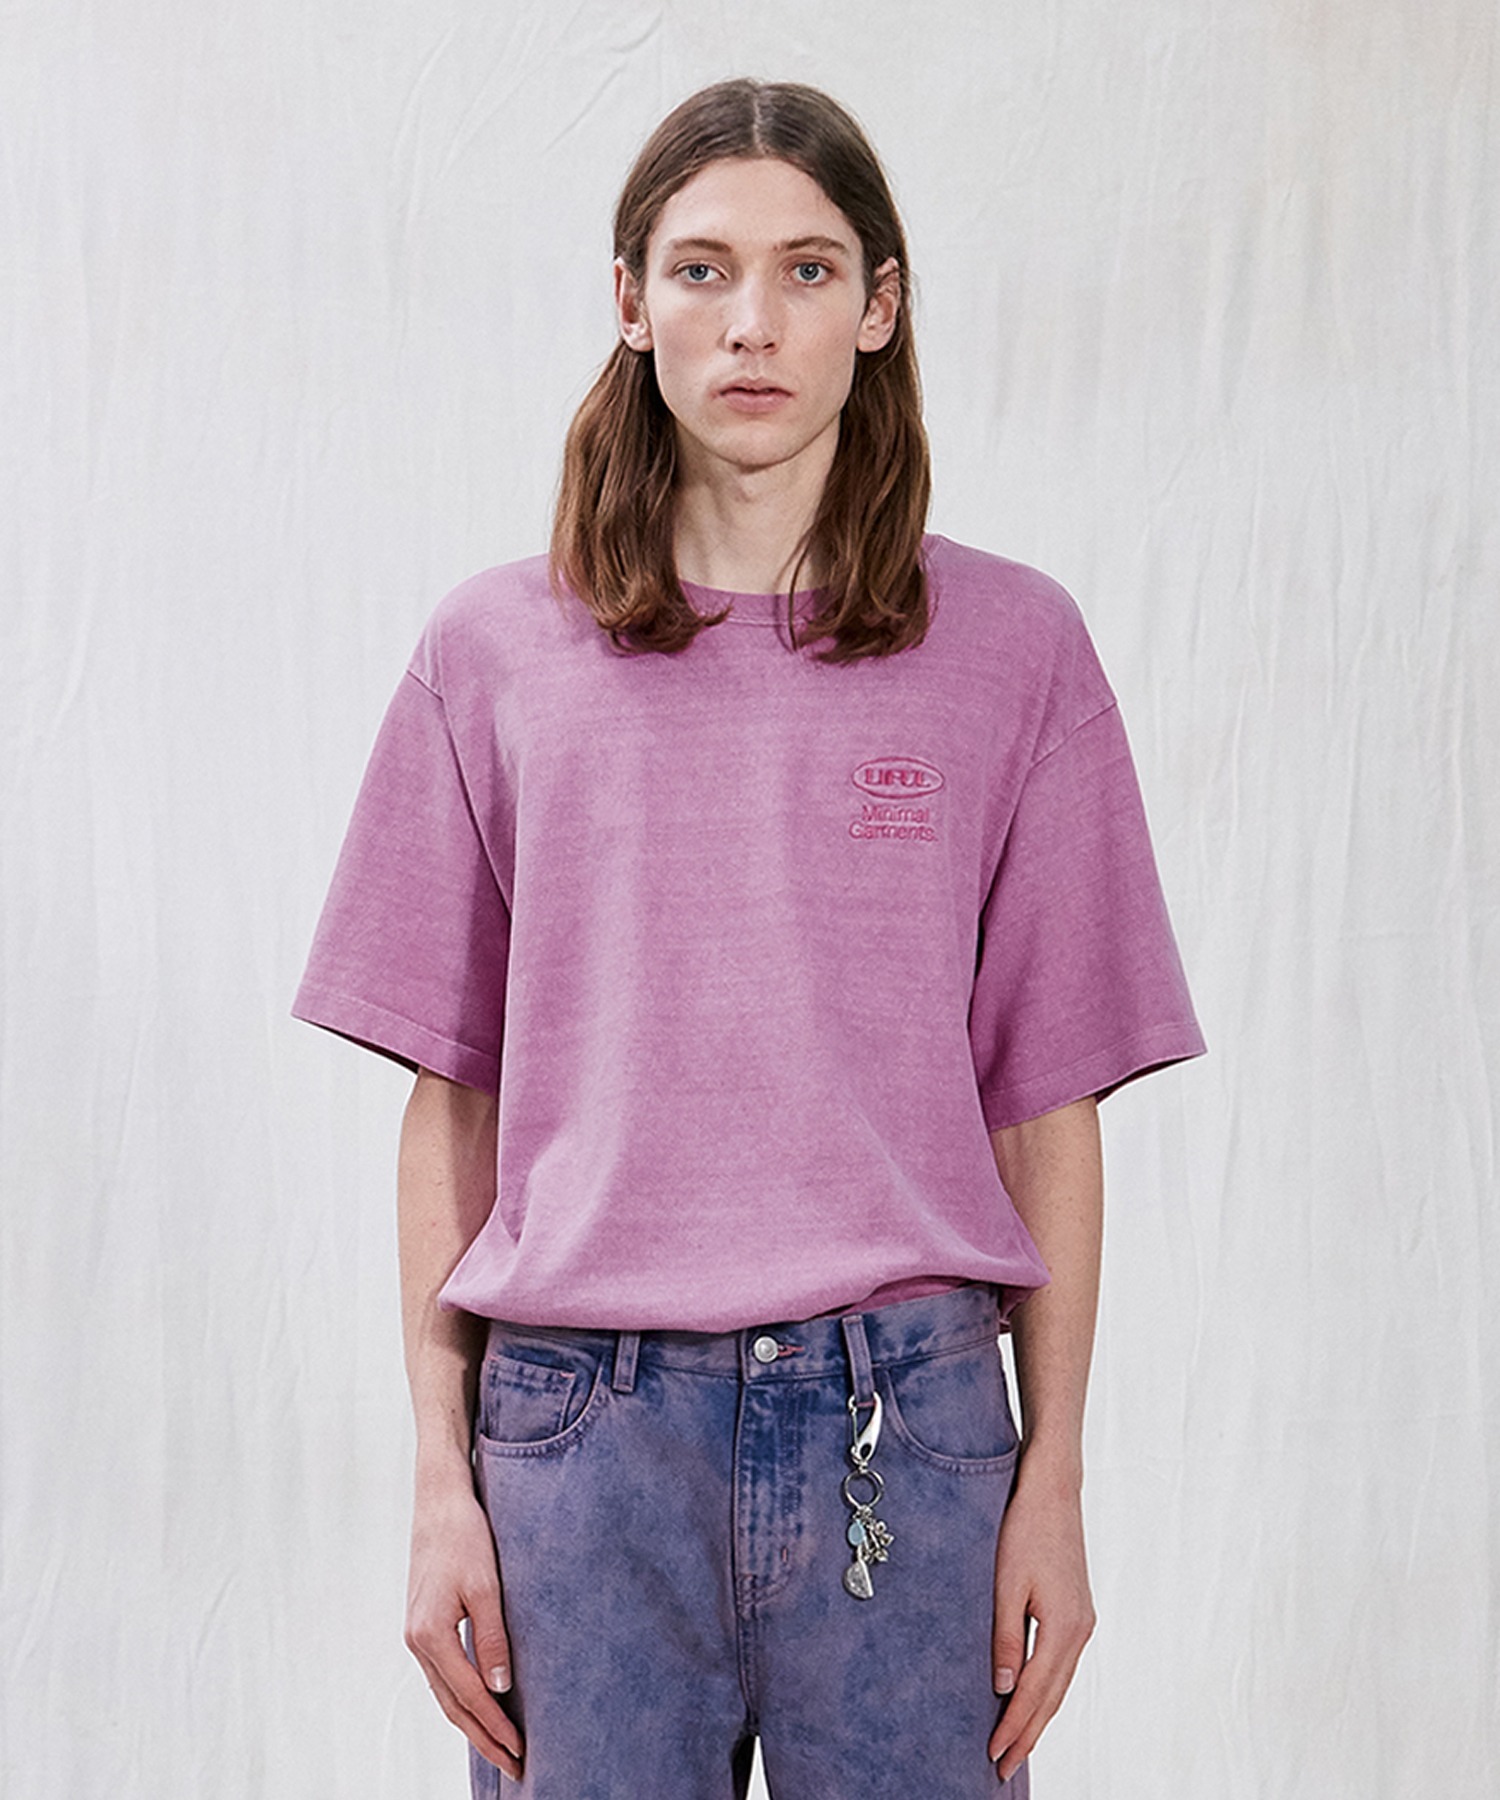 P-DYED OVAL LOGO TEE pink